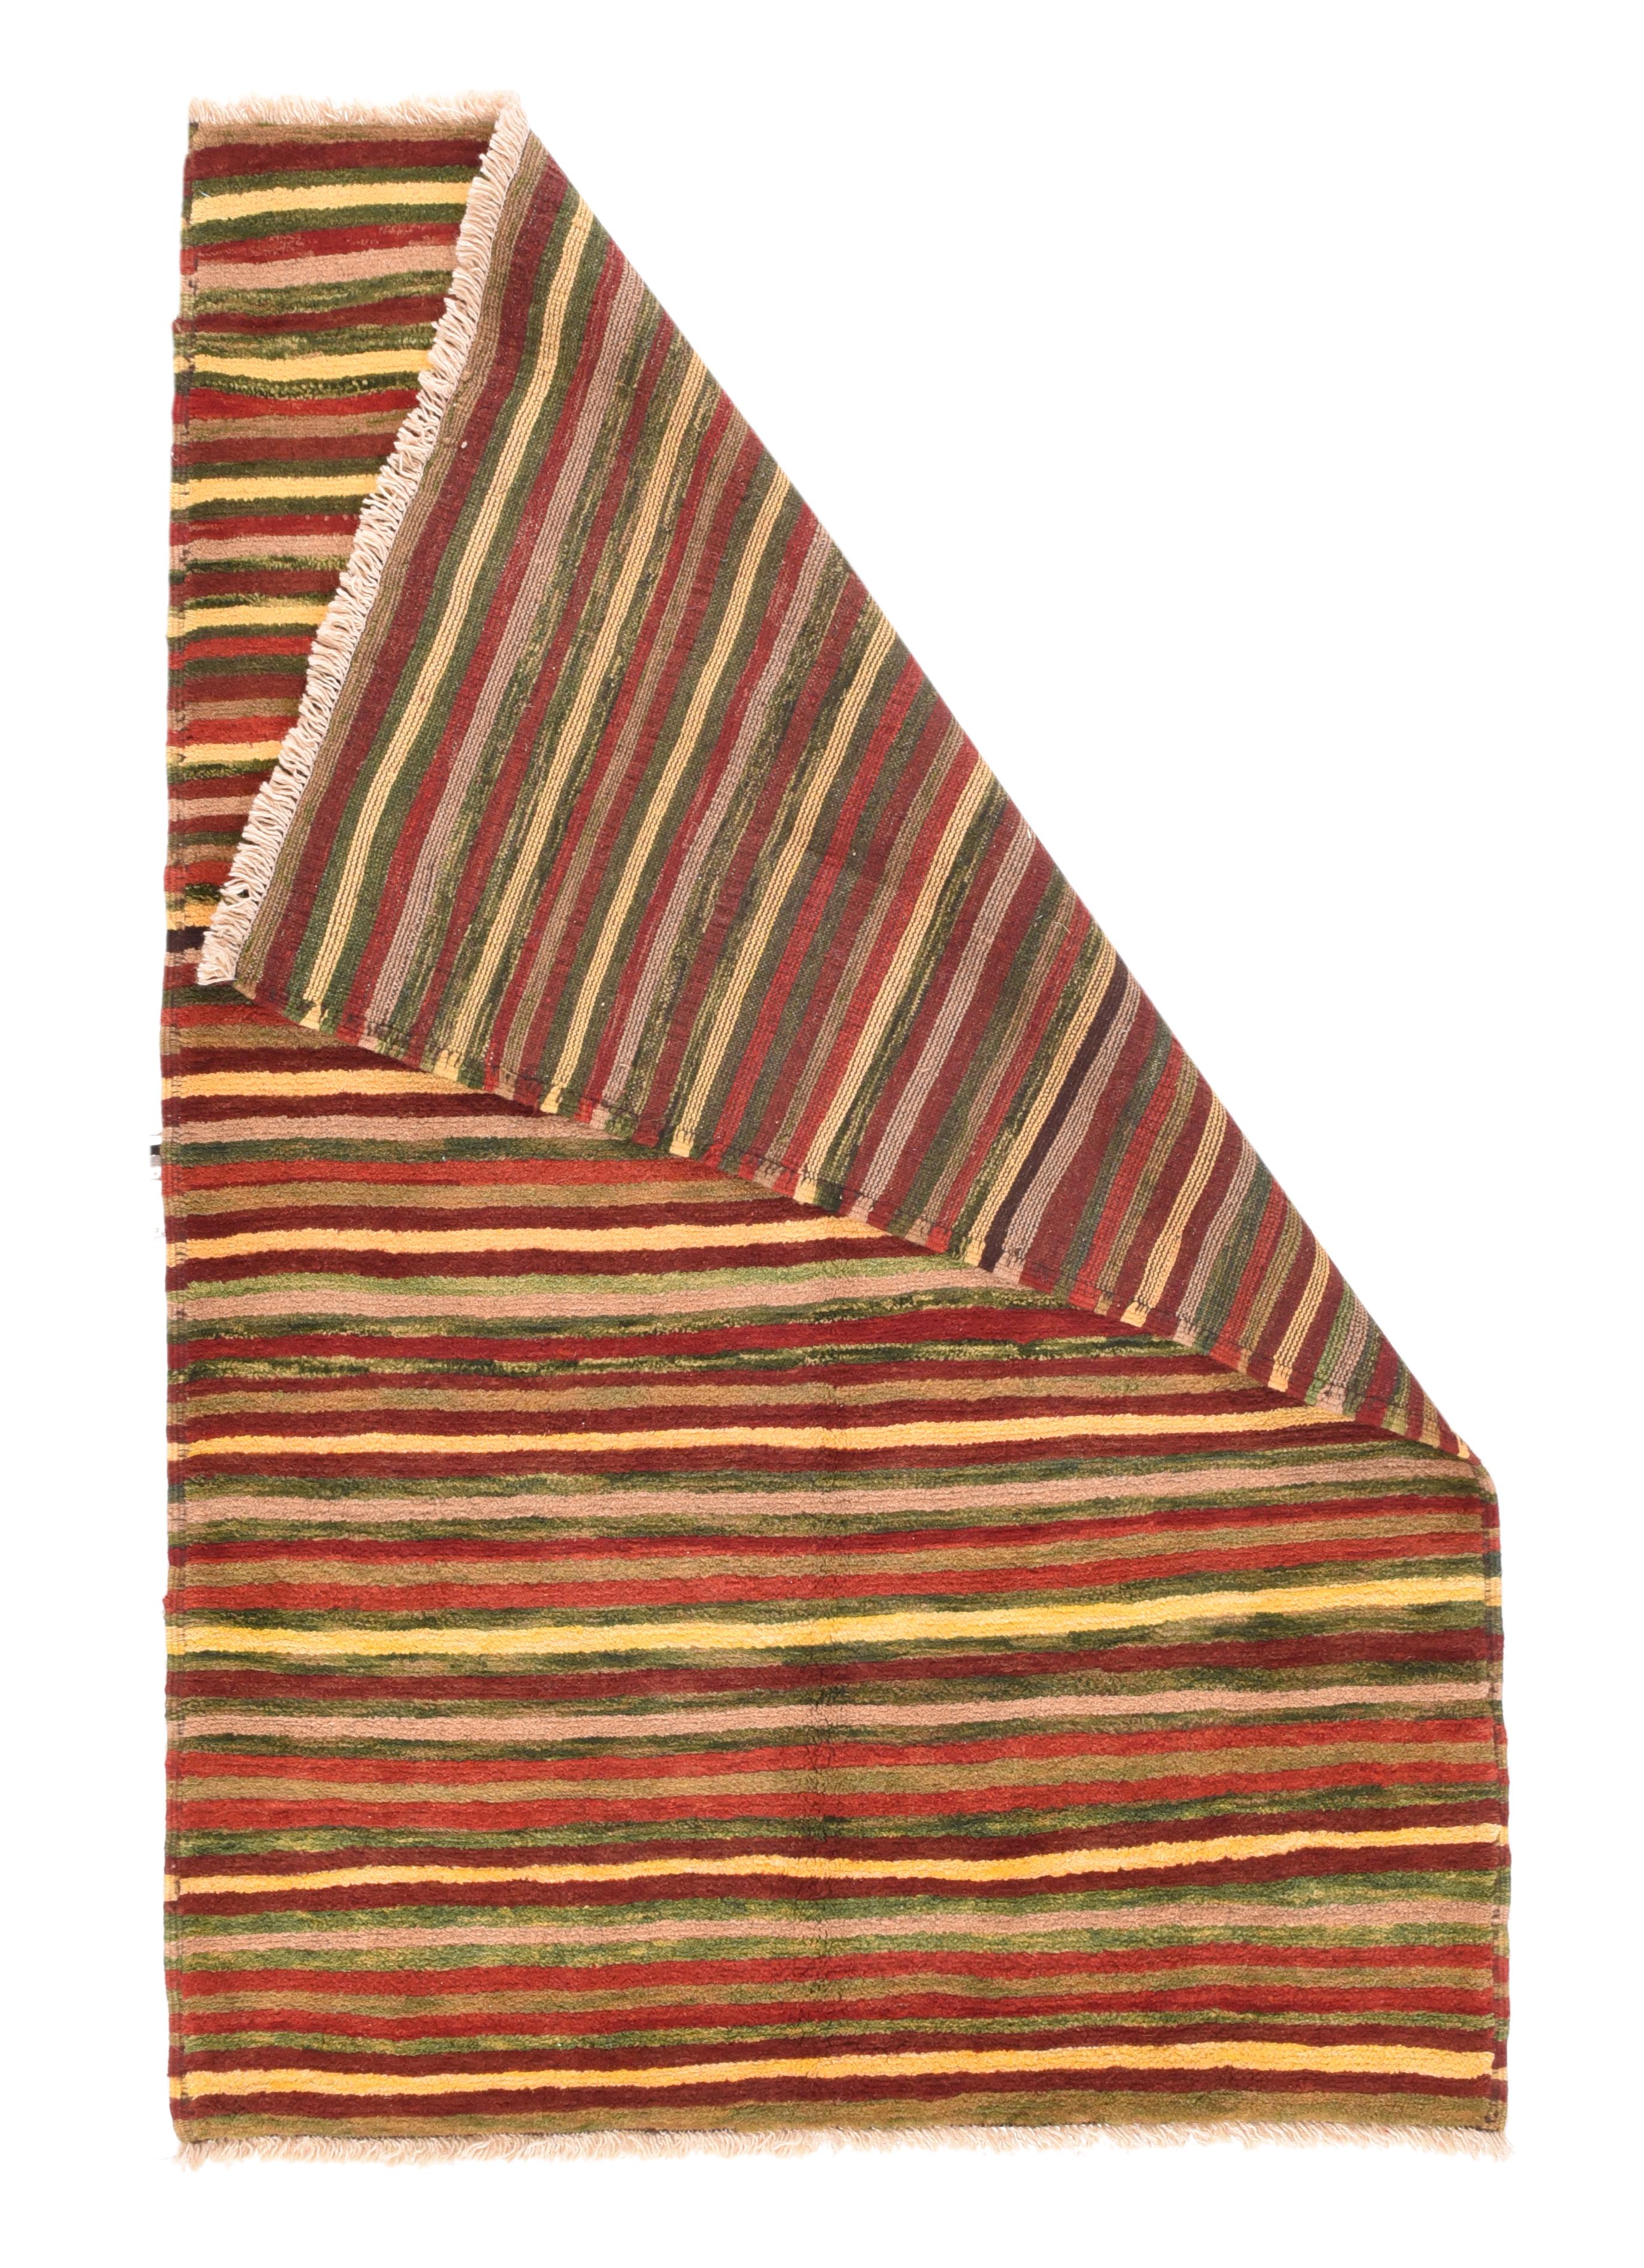 Vintage Gabbeh Rug 4'3'' x 6'5''. Probably created from piles of leftover yarns from more considered creations, this Qashghai nomadic scatter show wandering, wavering lines across the full width in yellow, various browns, light green, rust and red.